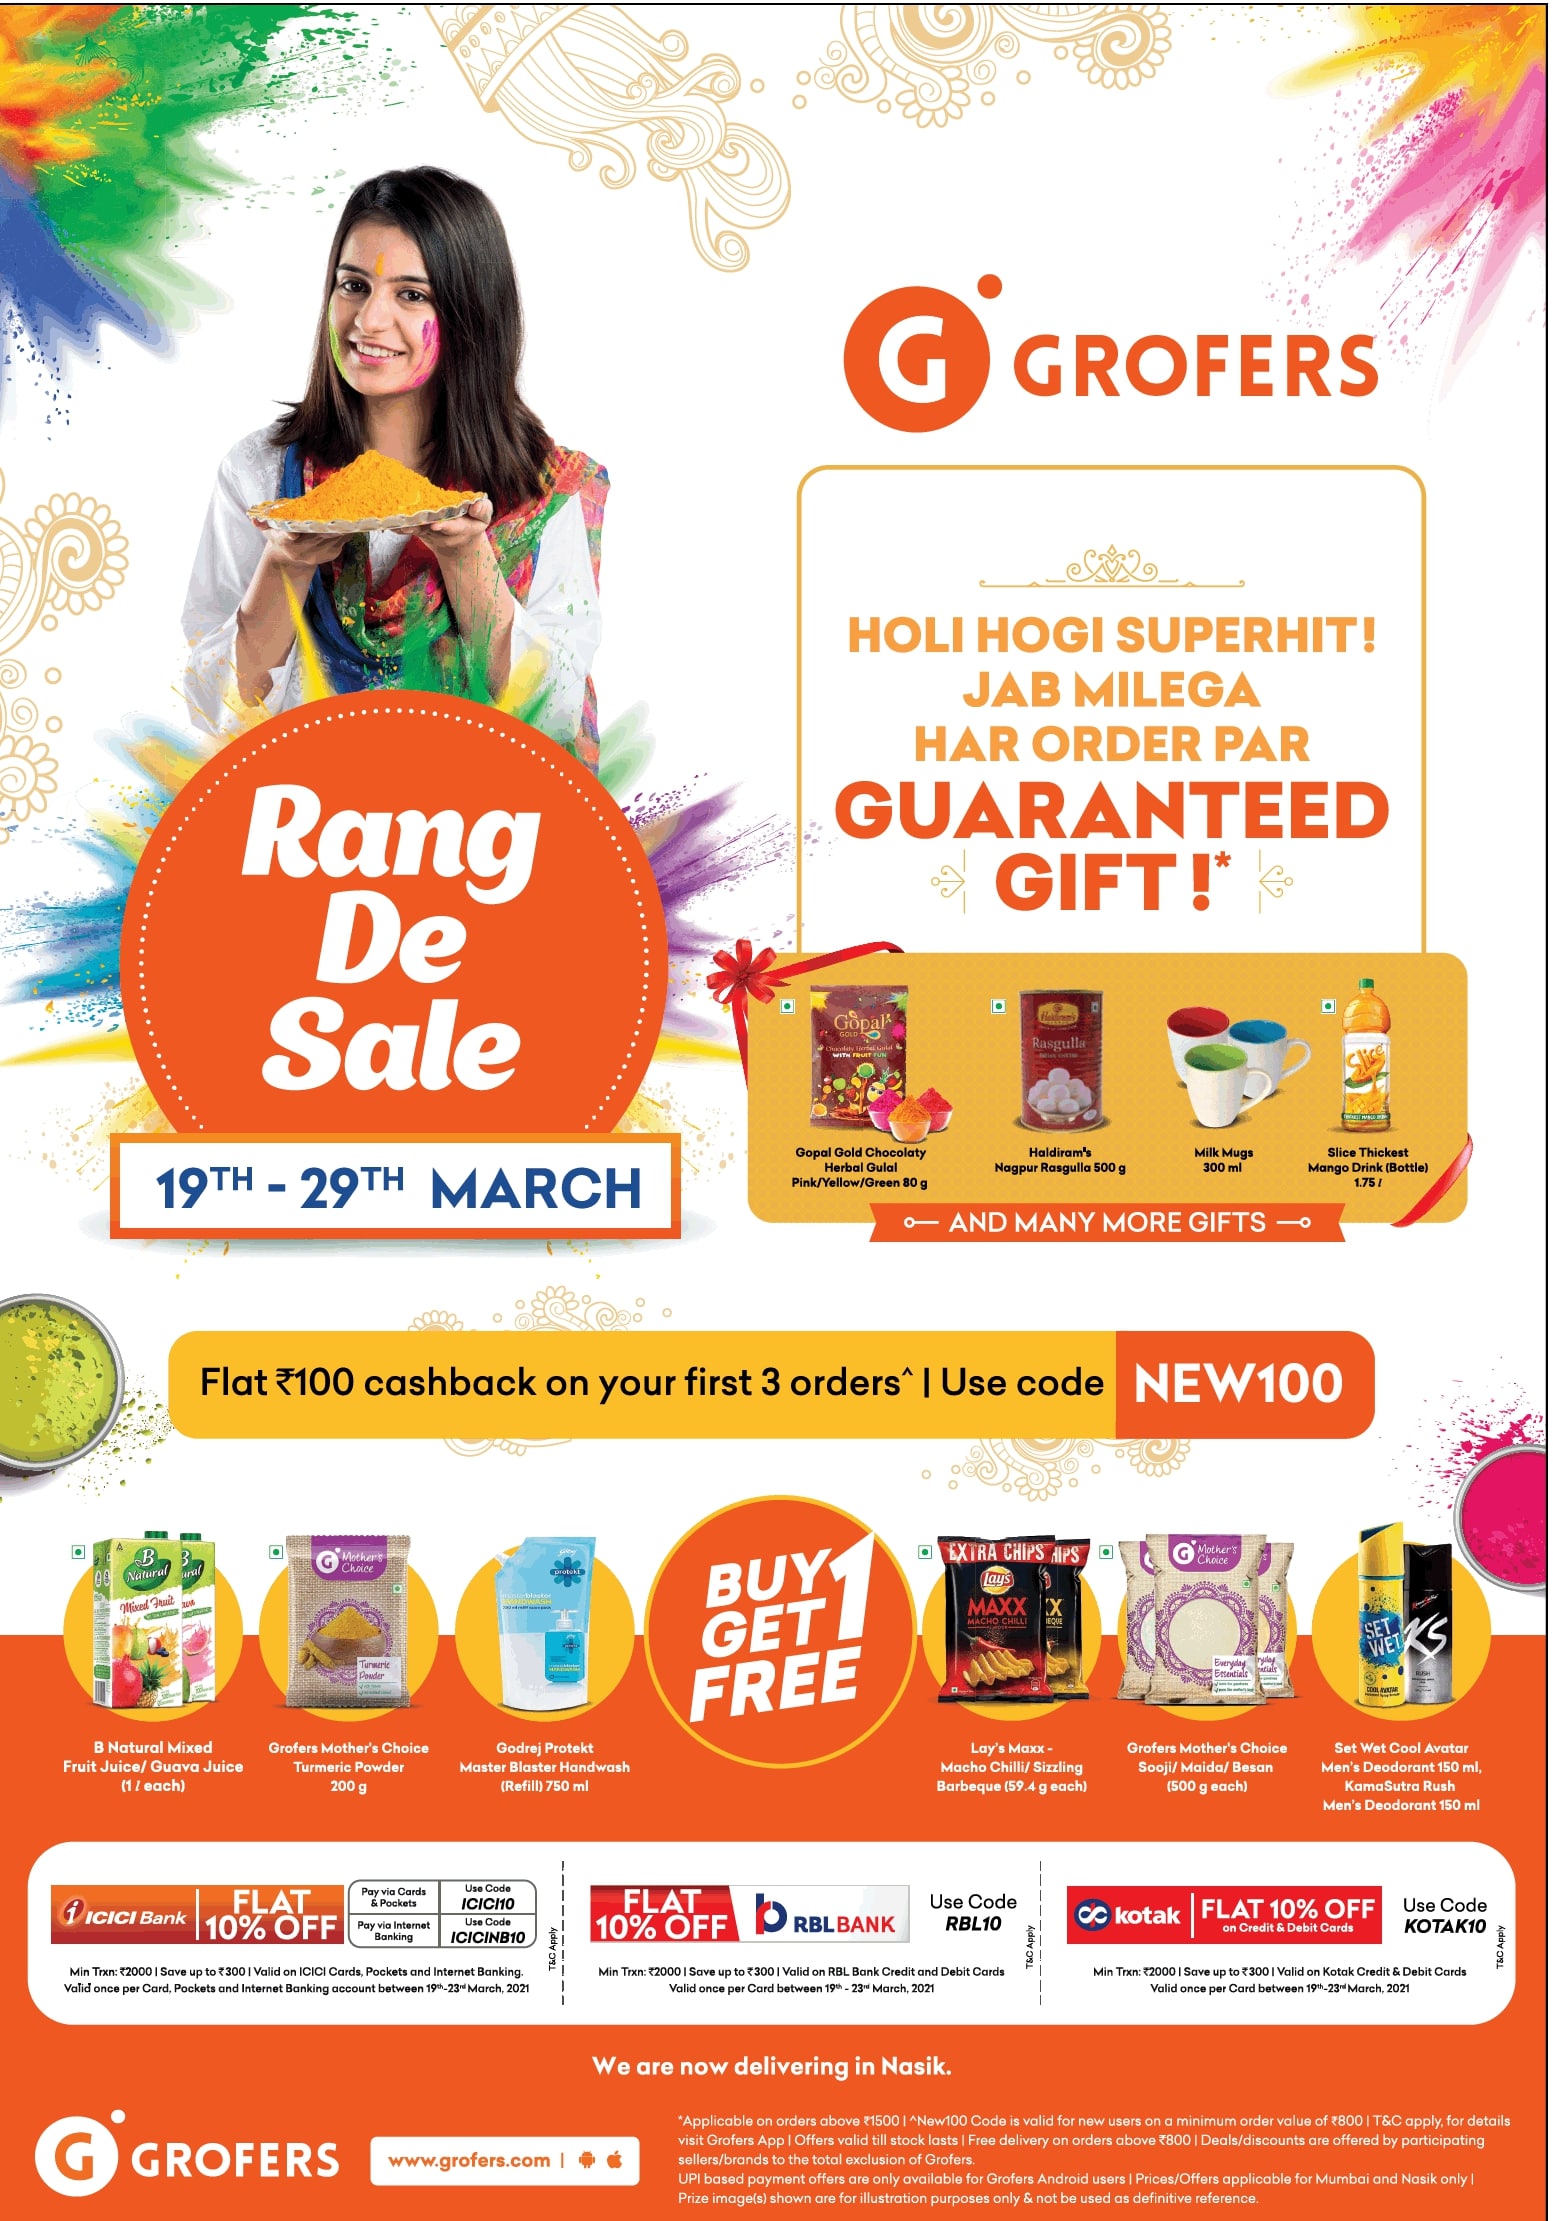 grofers-rang-de-sale-19th-29th-march-ad-bombay-times-20-03-2021